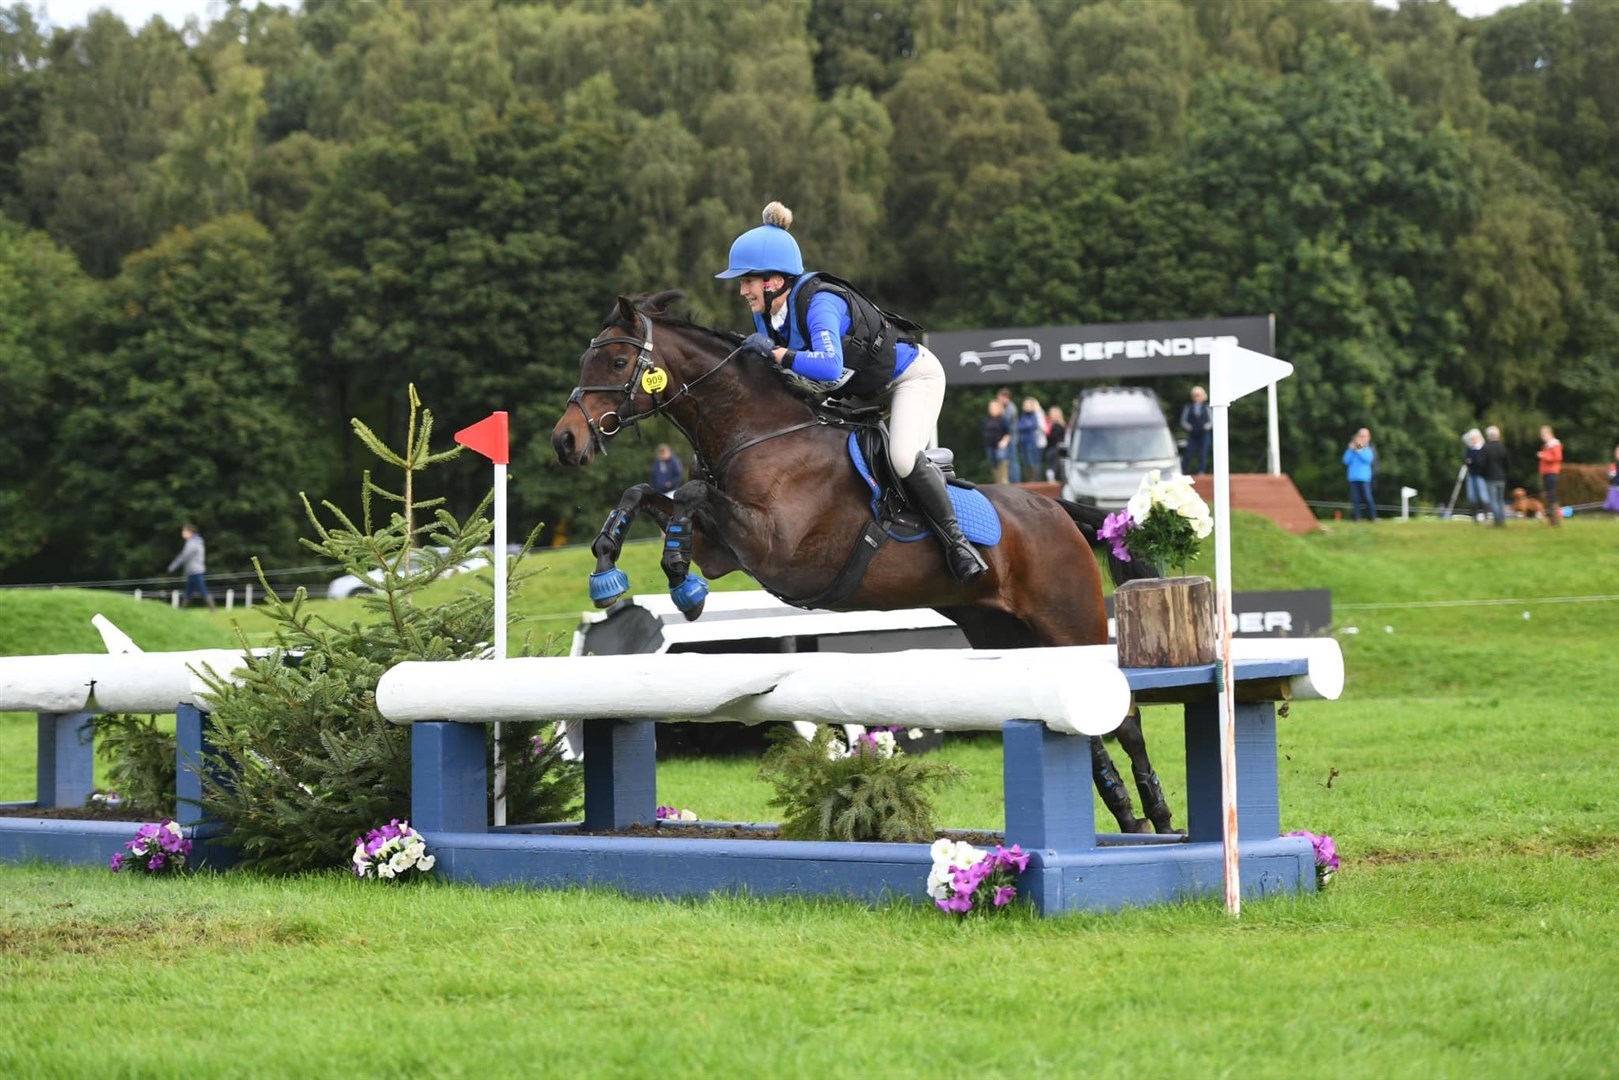 Kelly Skinner and Reagan's Pure Dynamite at the Scottish Grassroots Eventing Festival at Blair Castle. Photo: Kelly Skinner/Athalens Photography